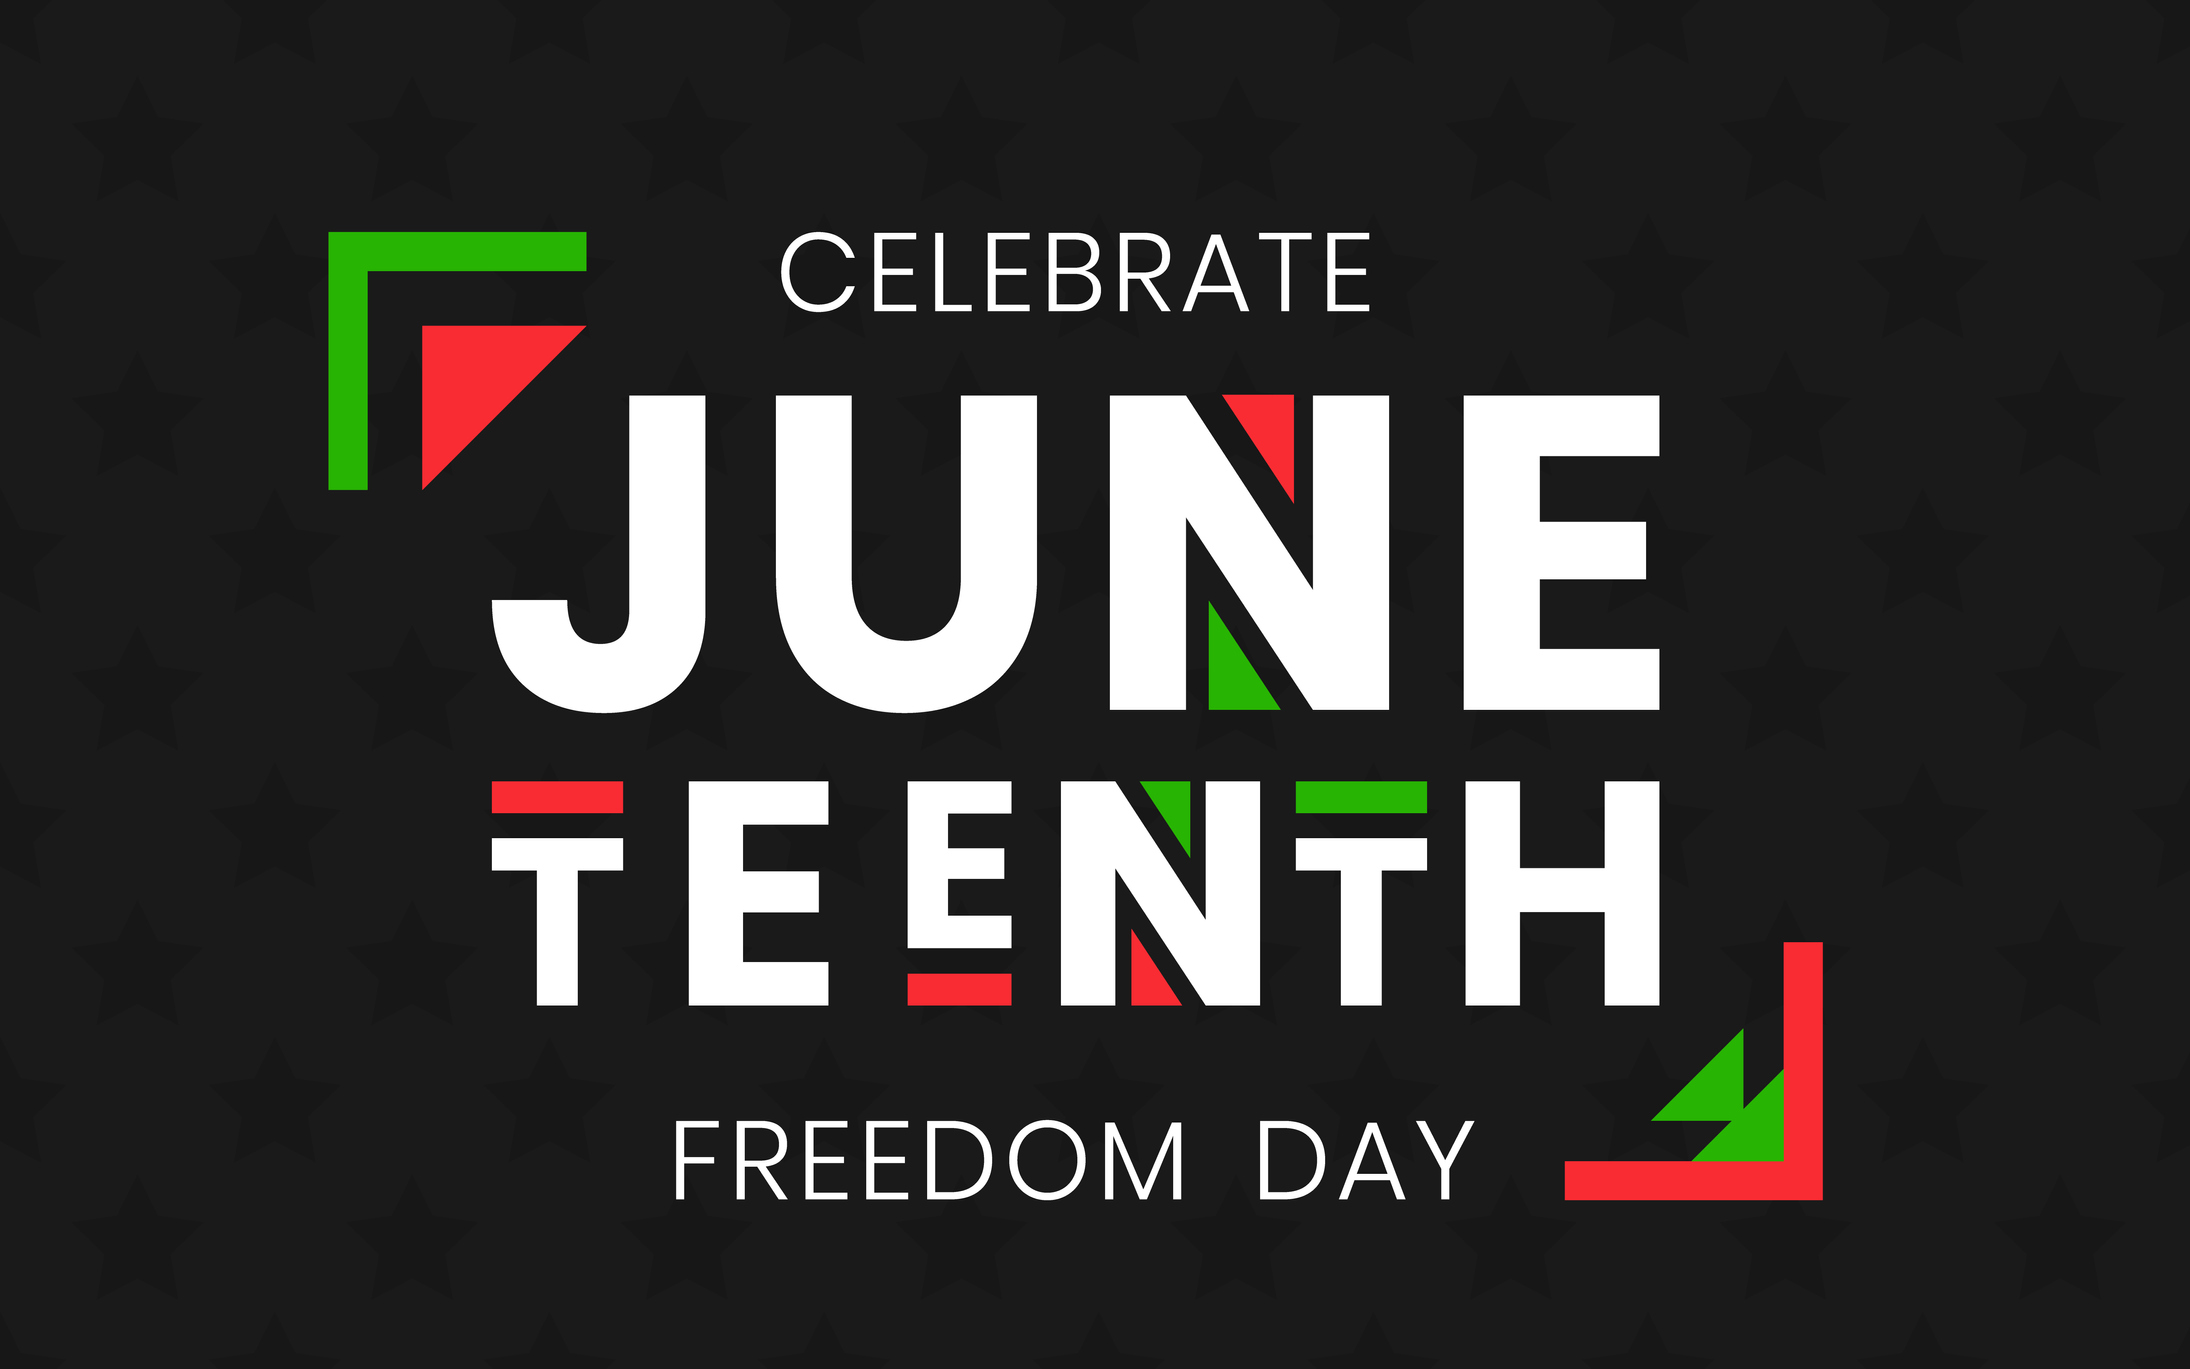 Juneteenth Freedom Day banner. African-American Independence Day, June 19, 1865. Vector illustration of design template for national holiday poster or card.